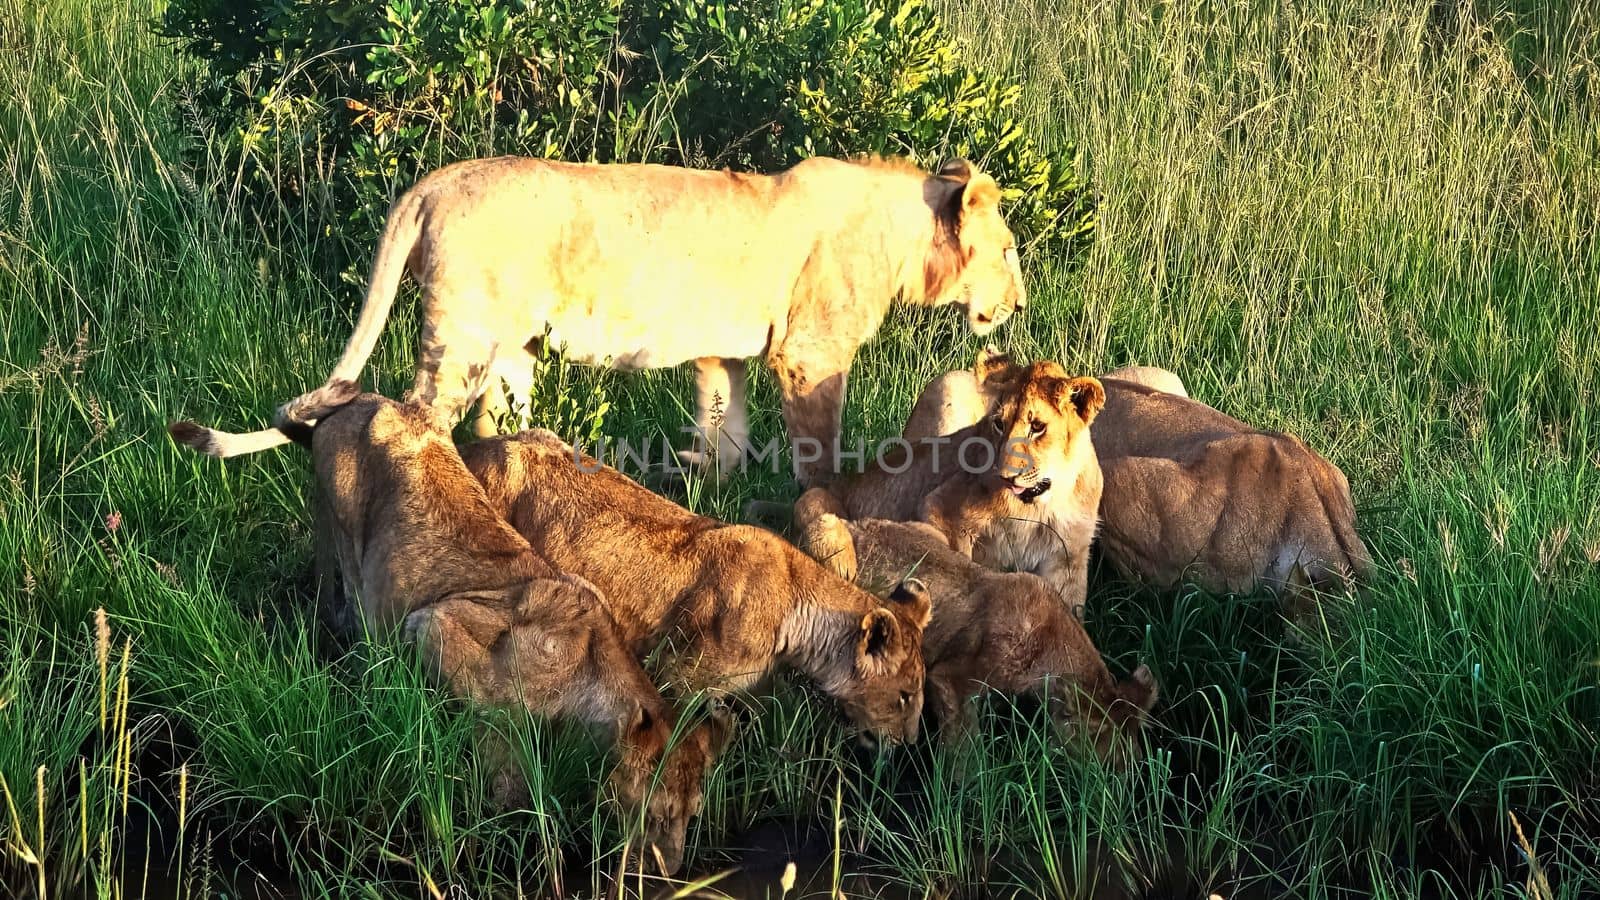 Impressive wild lions in the wilds of Africa in Masai Mara. by MP_foto71